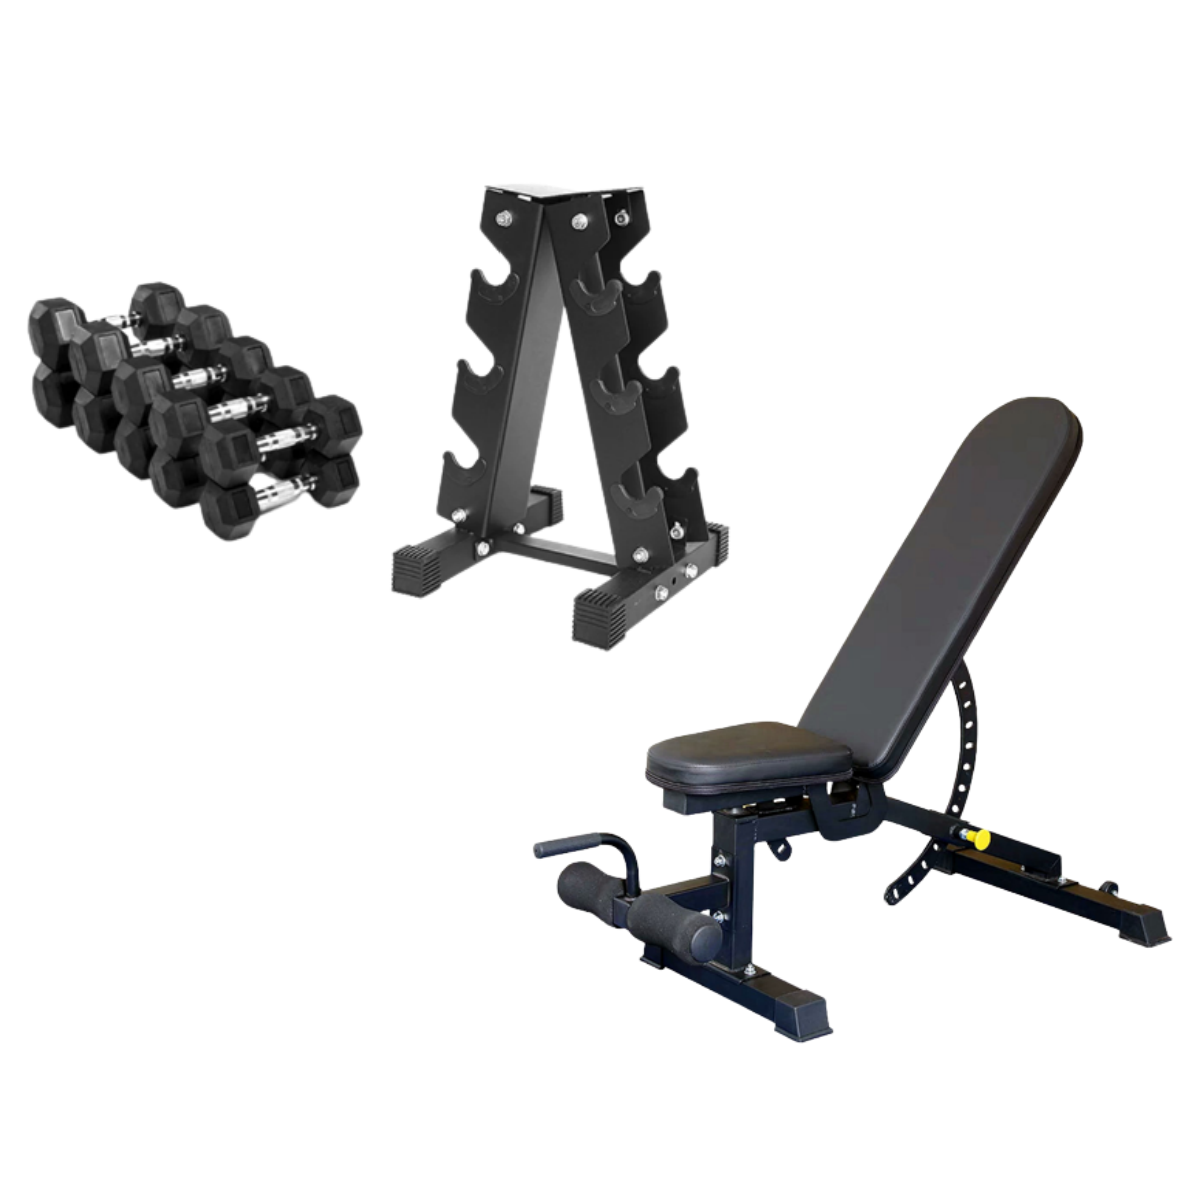 42KG Hex Dumbbells with Stand and Decline Bench